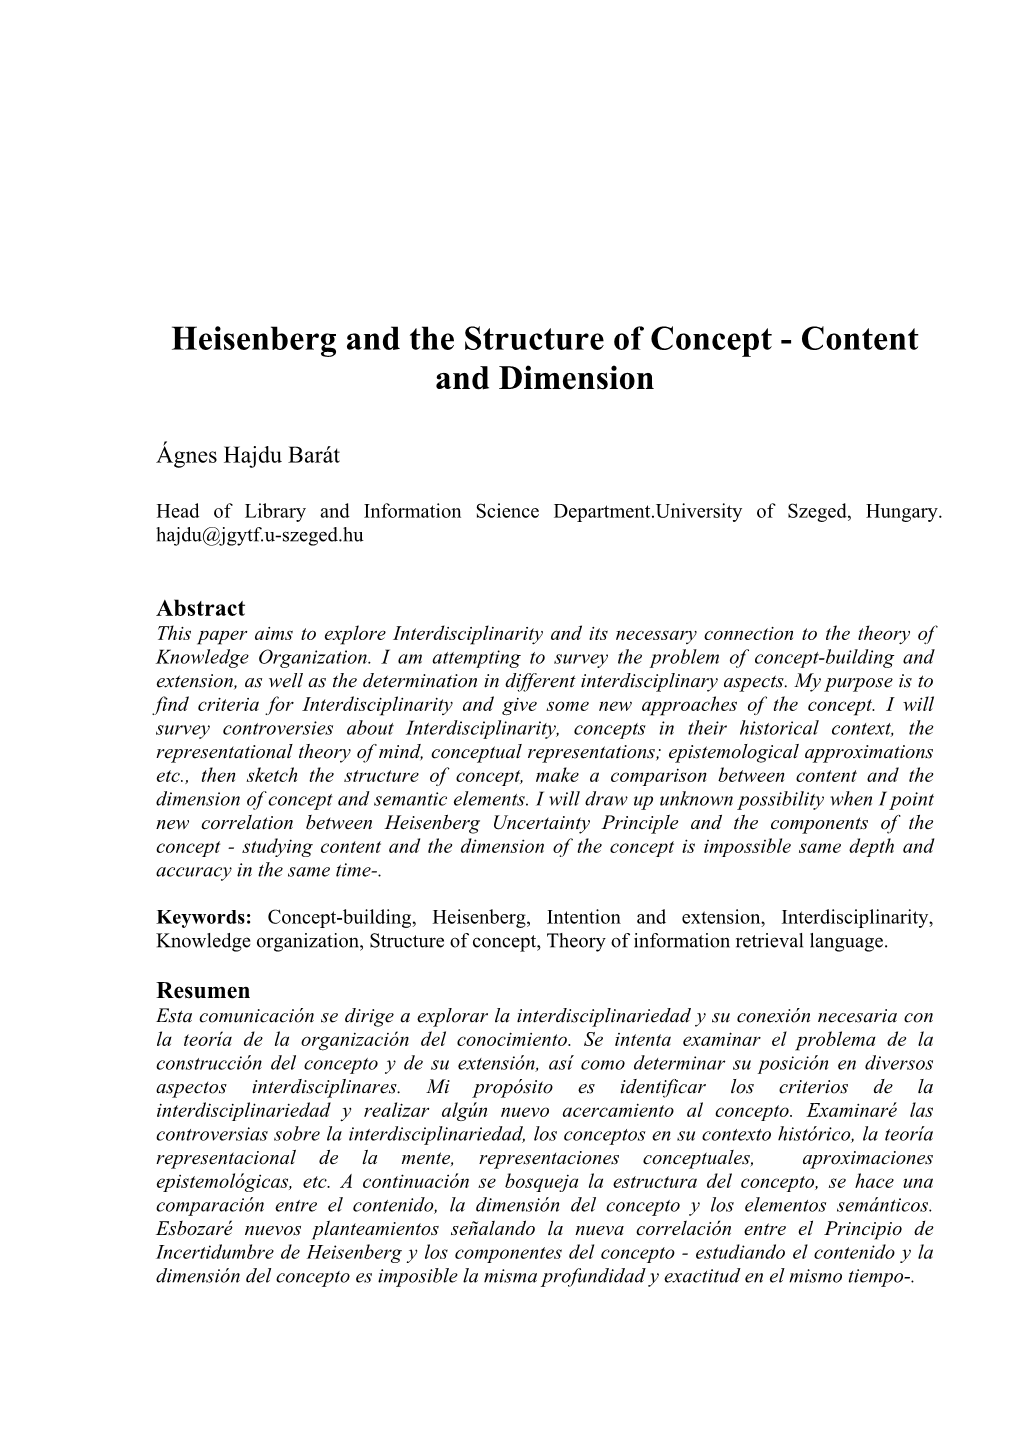 Heisenberg and the Structure of Concept - Content and Dimension